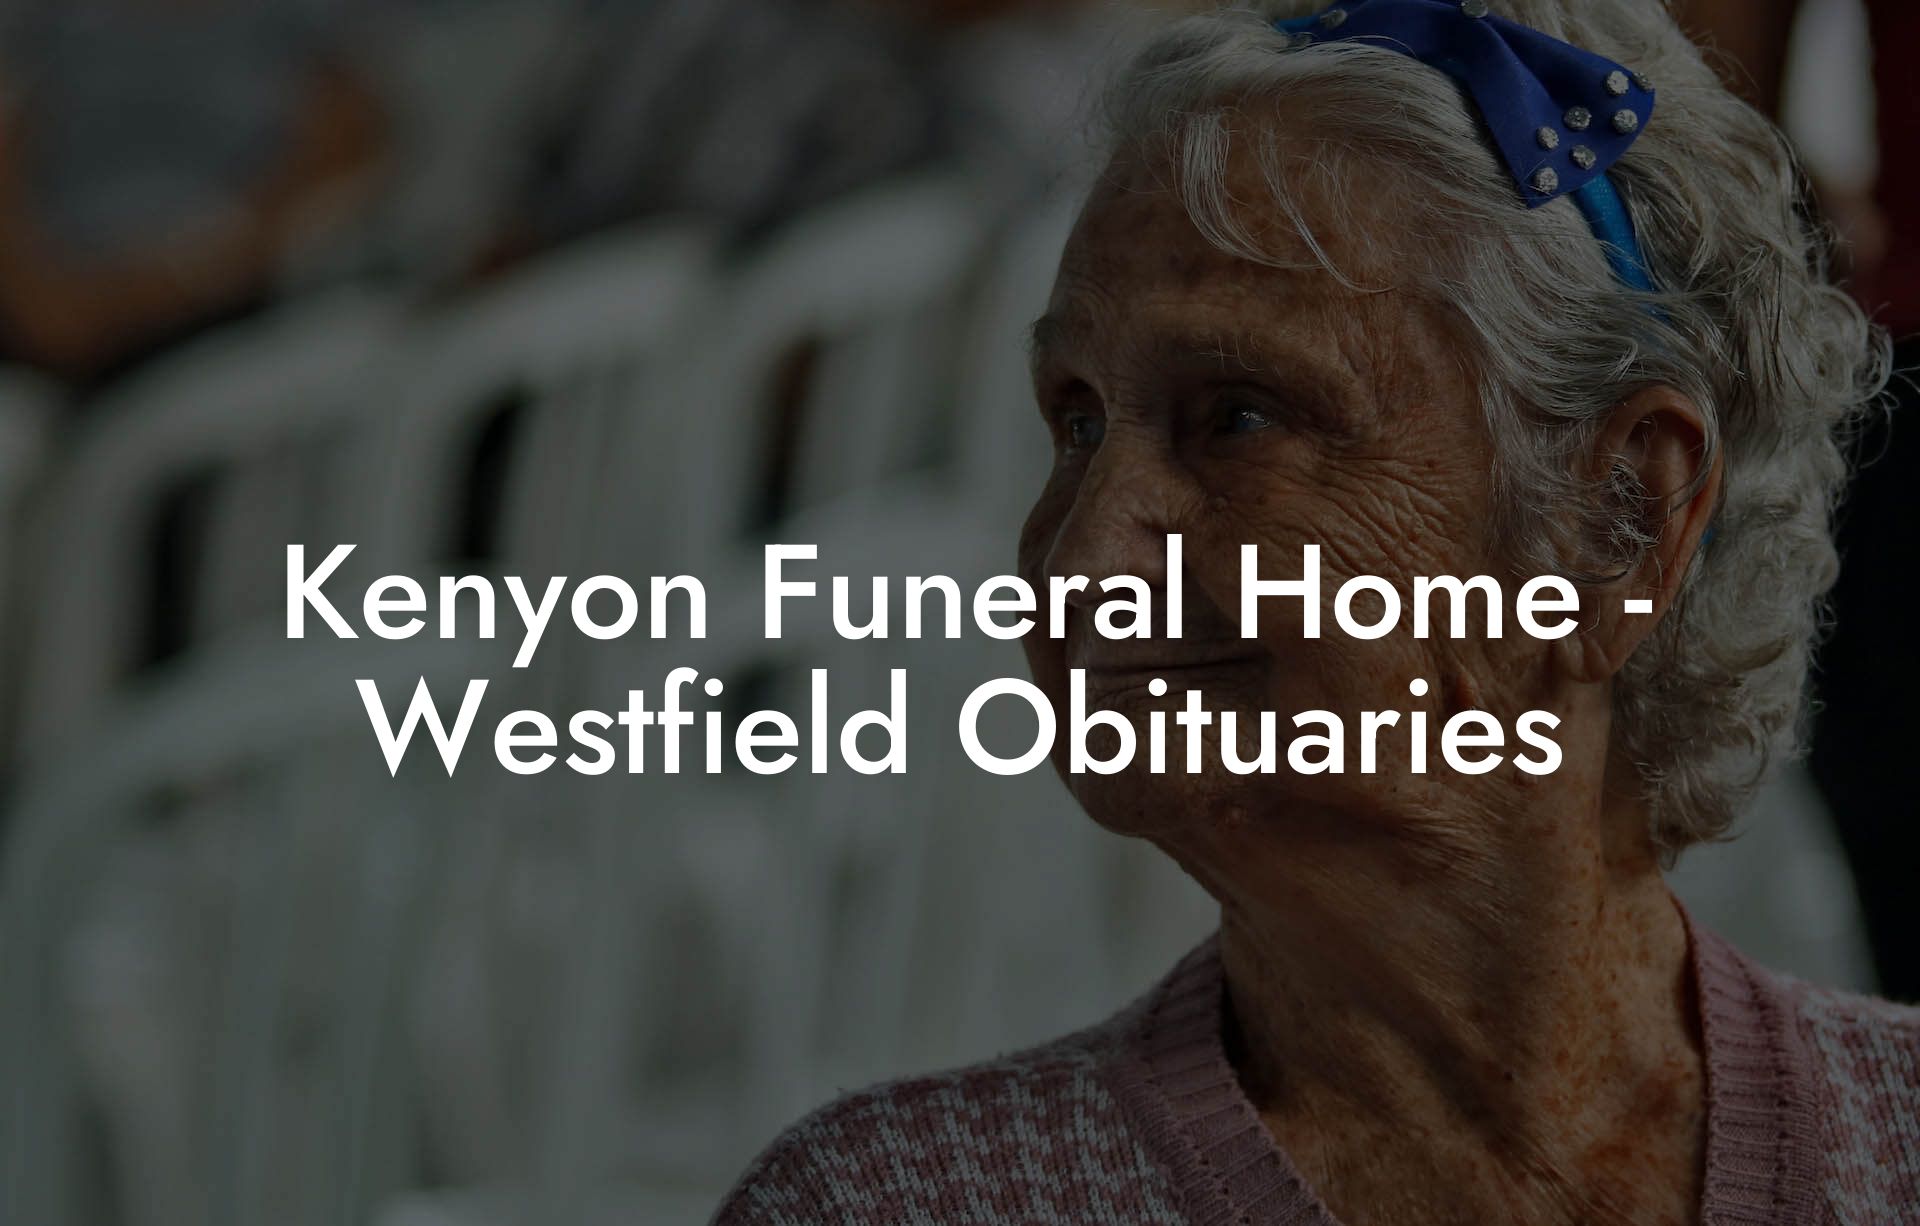 Kenyon Funeral Home - Westfield Obituaries